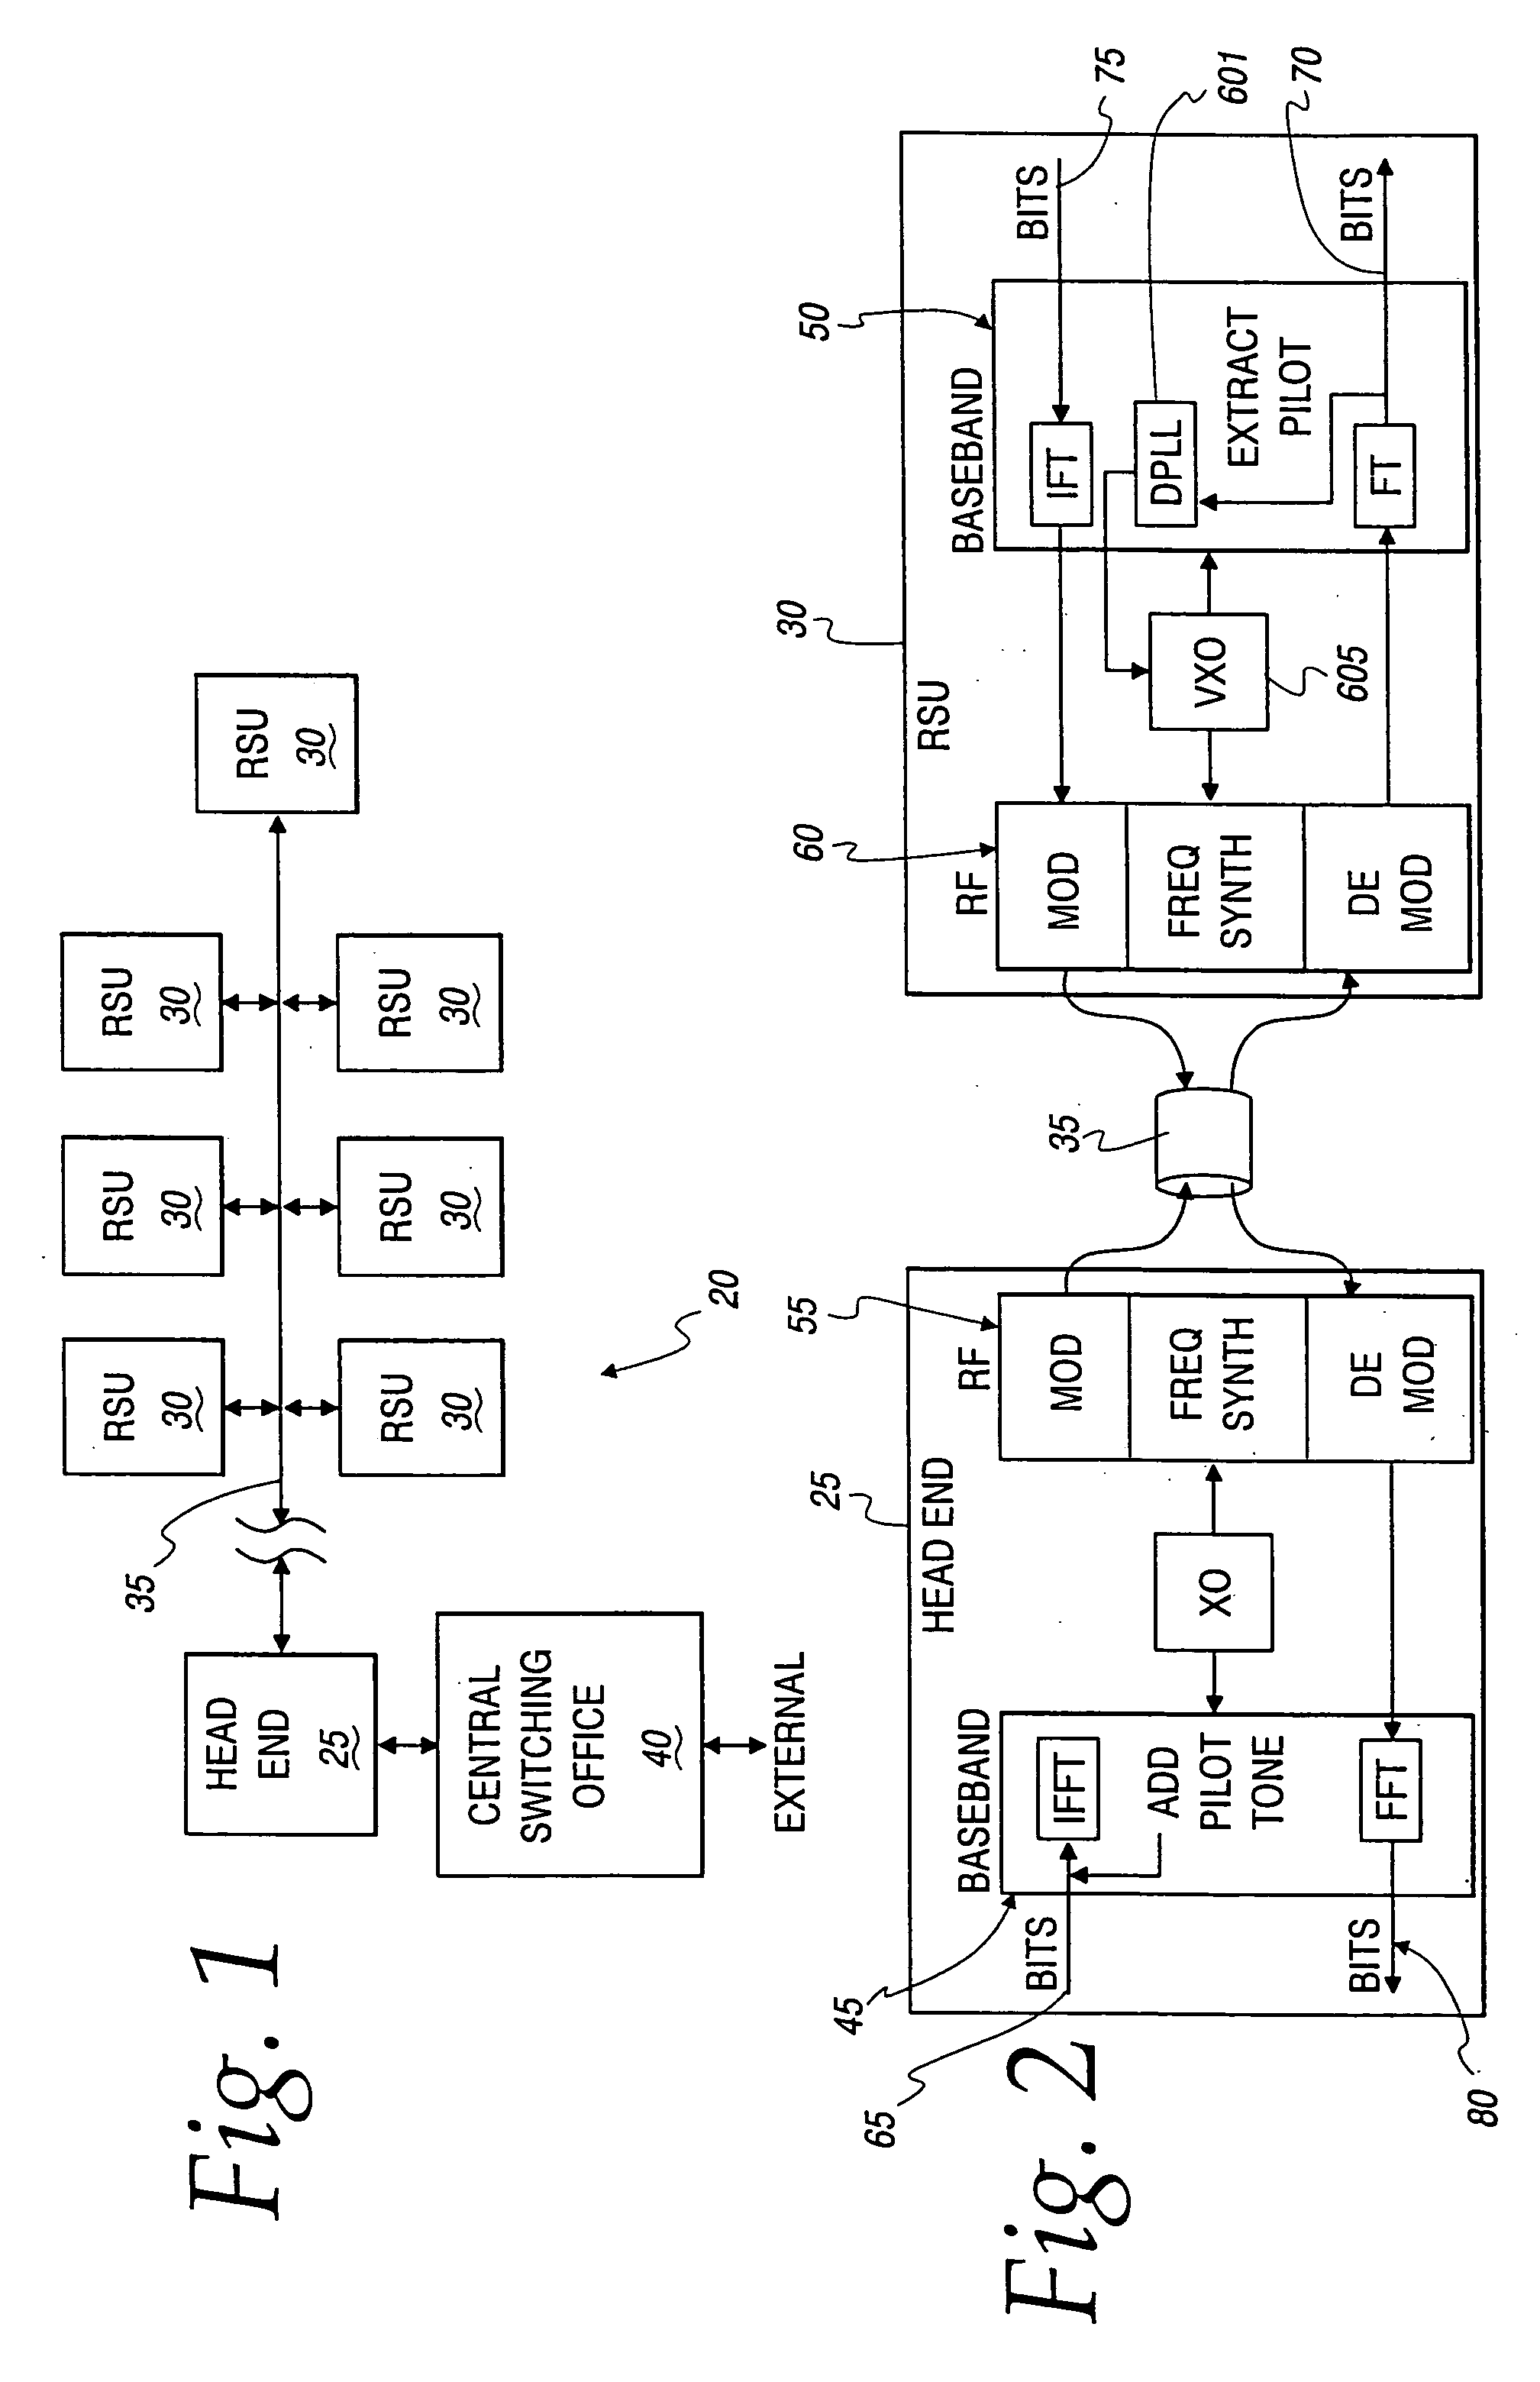 Apparatus and method for symbol alignment in a multi-point OFDM/DMT digital communications system